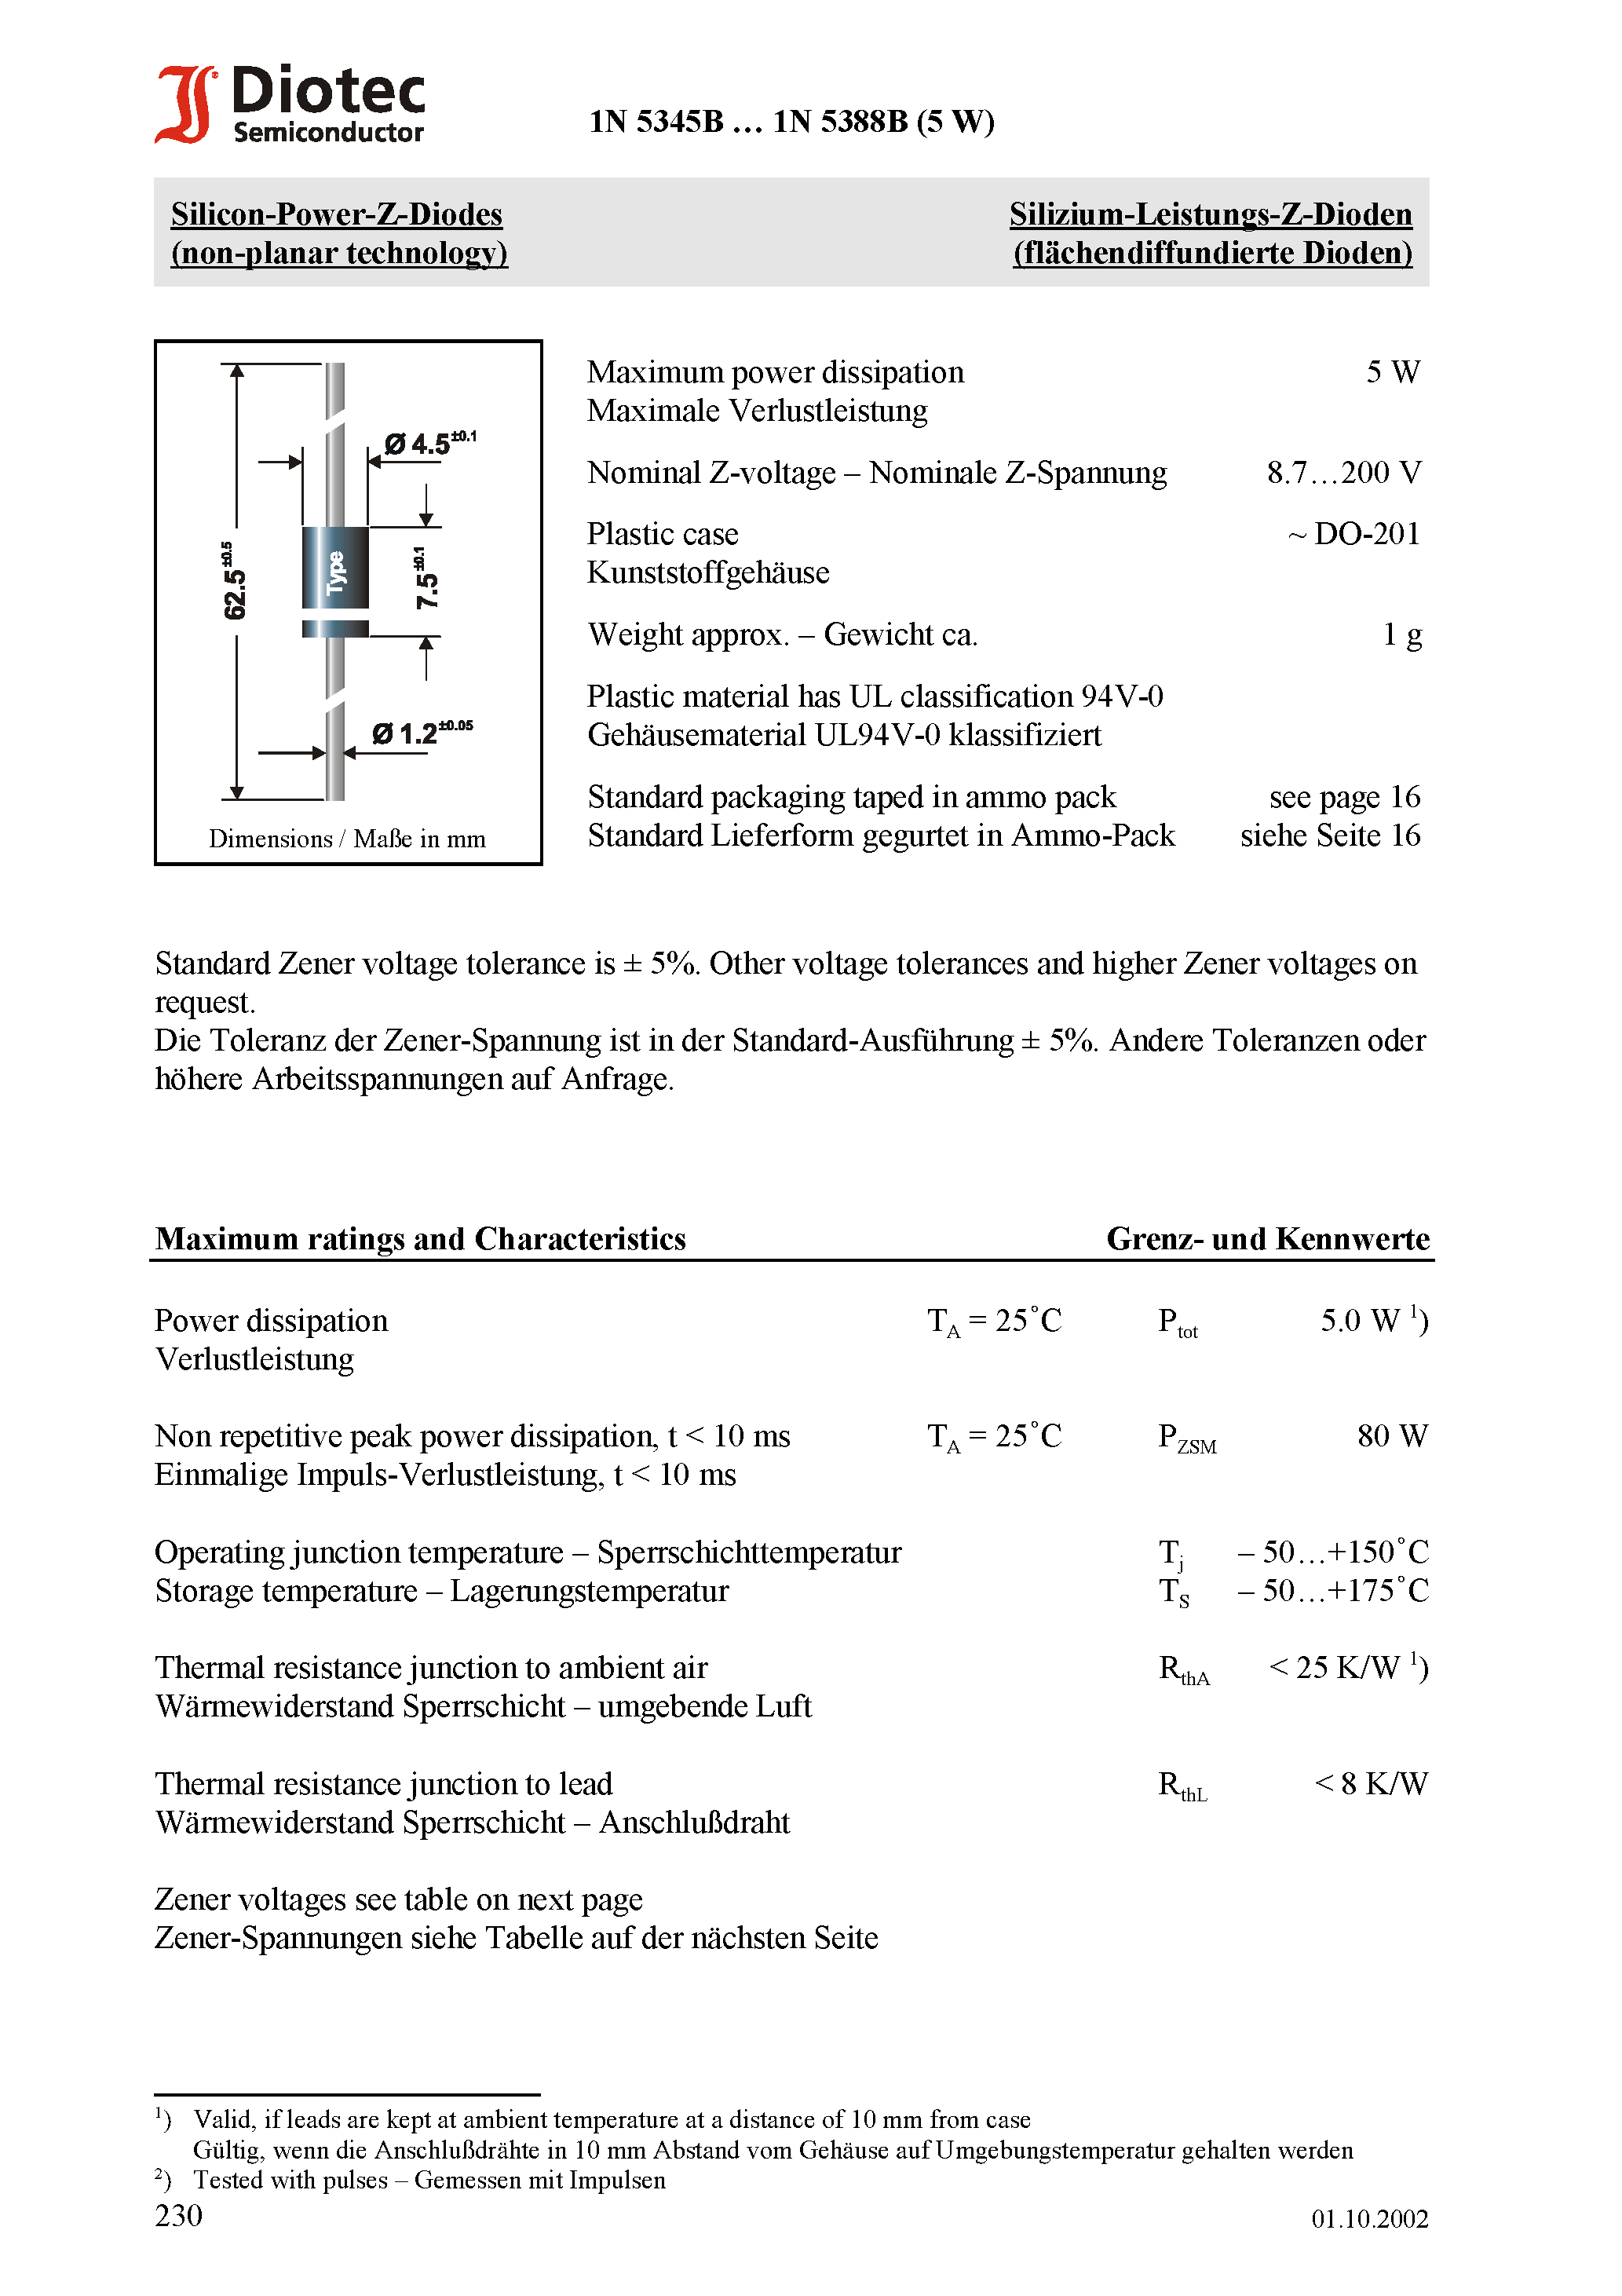 Datasheet 1N5365B - Silicon-Power-Z-Diodes (non-planar technology) page 1